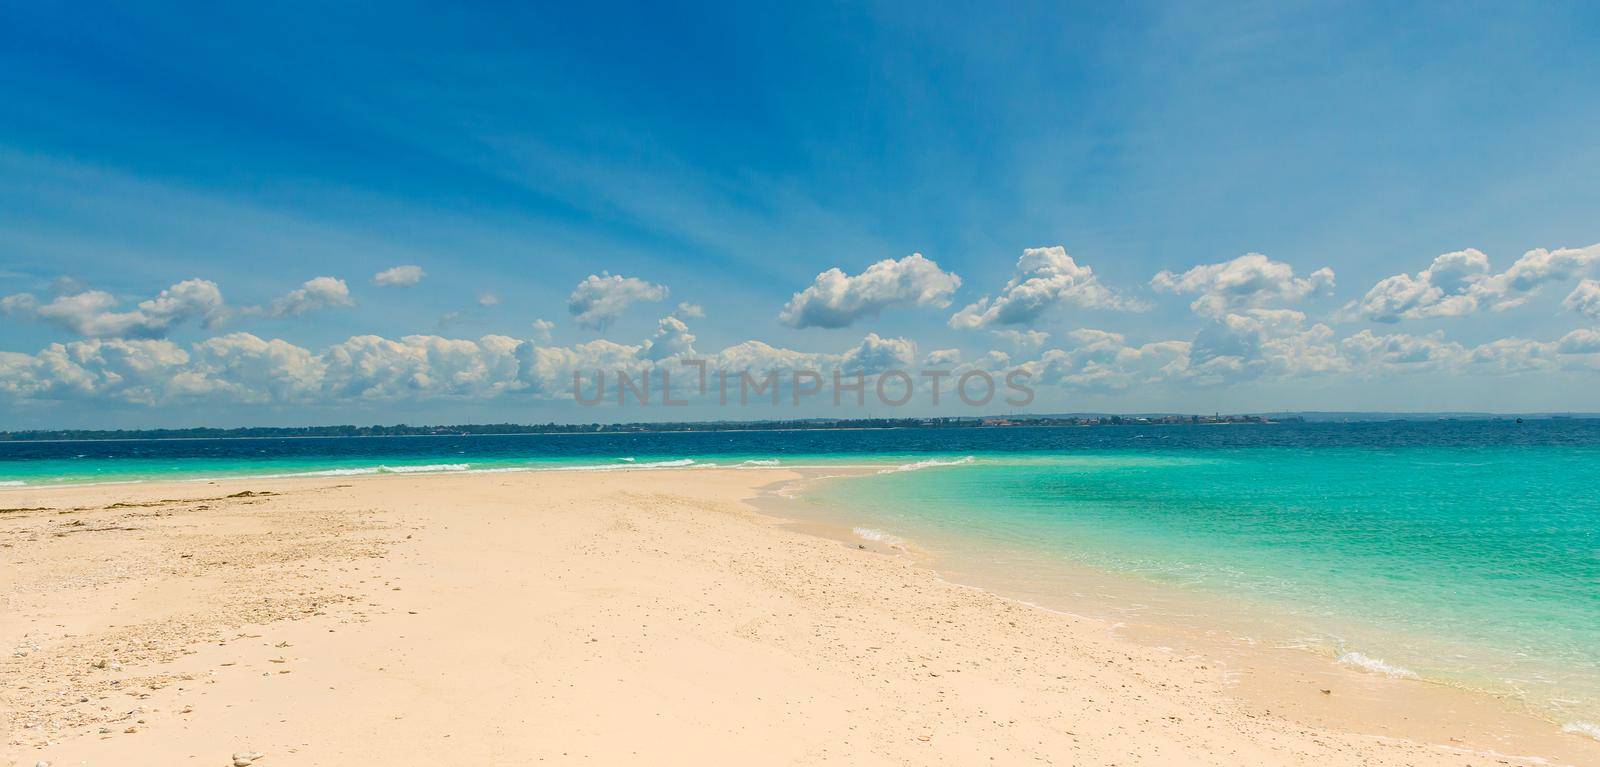 sandbank with transparent turquoise water by tan4ikk1